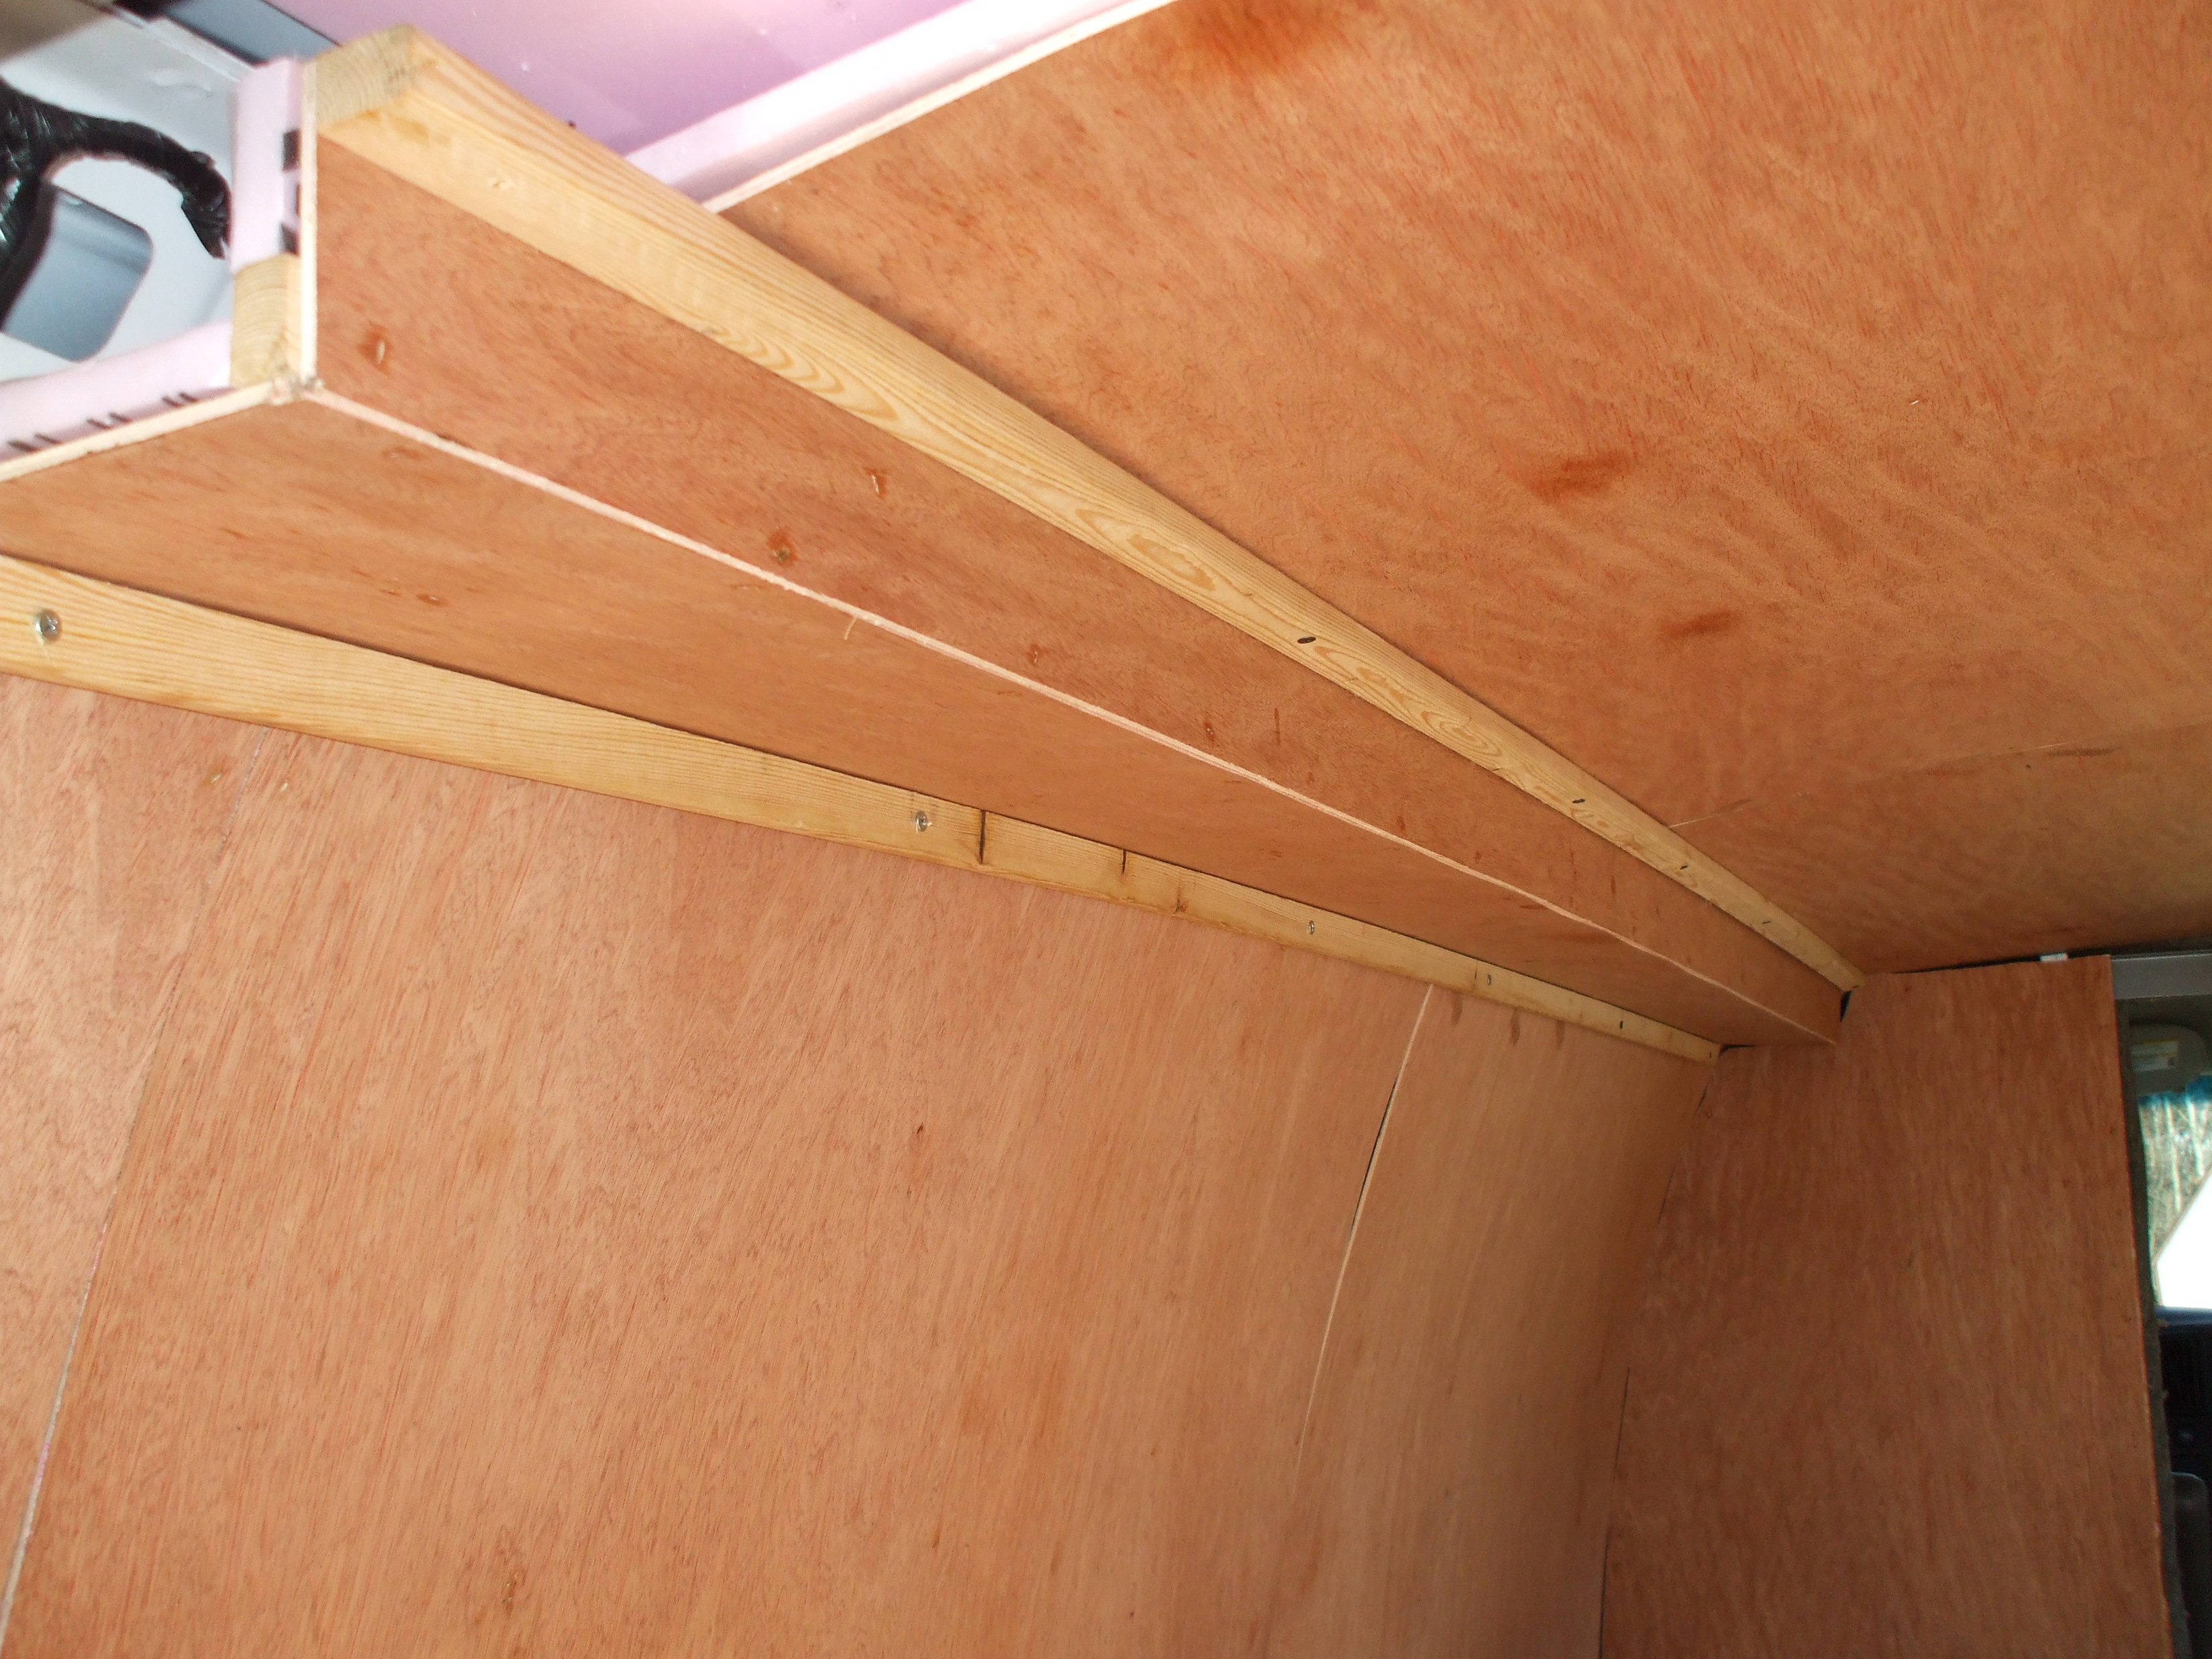 luan plywood and soffit installed in a conversion van RV